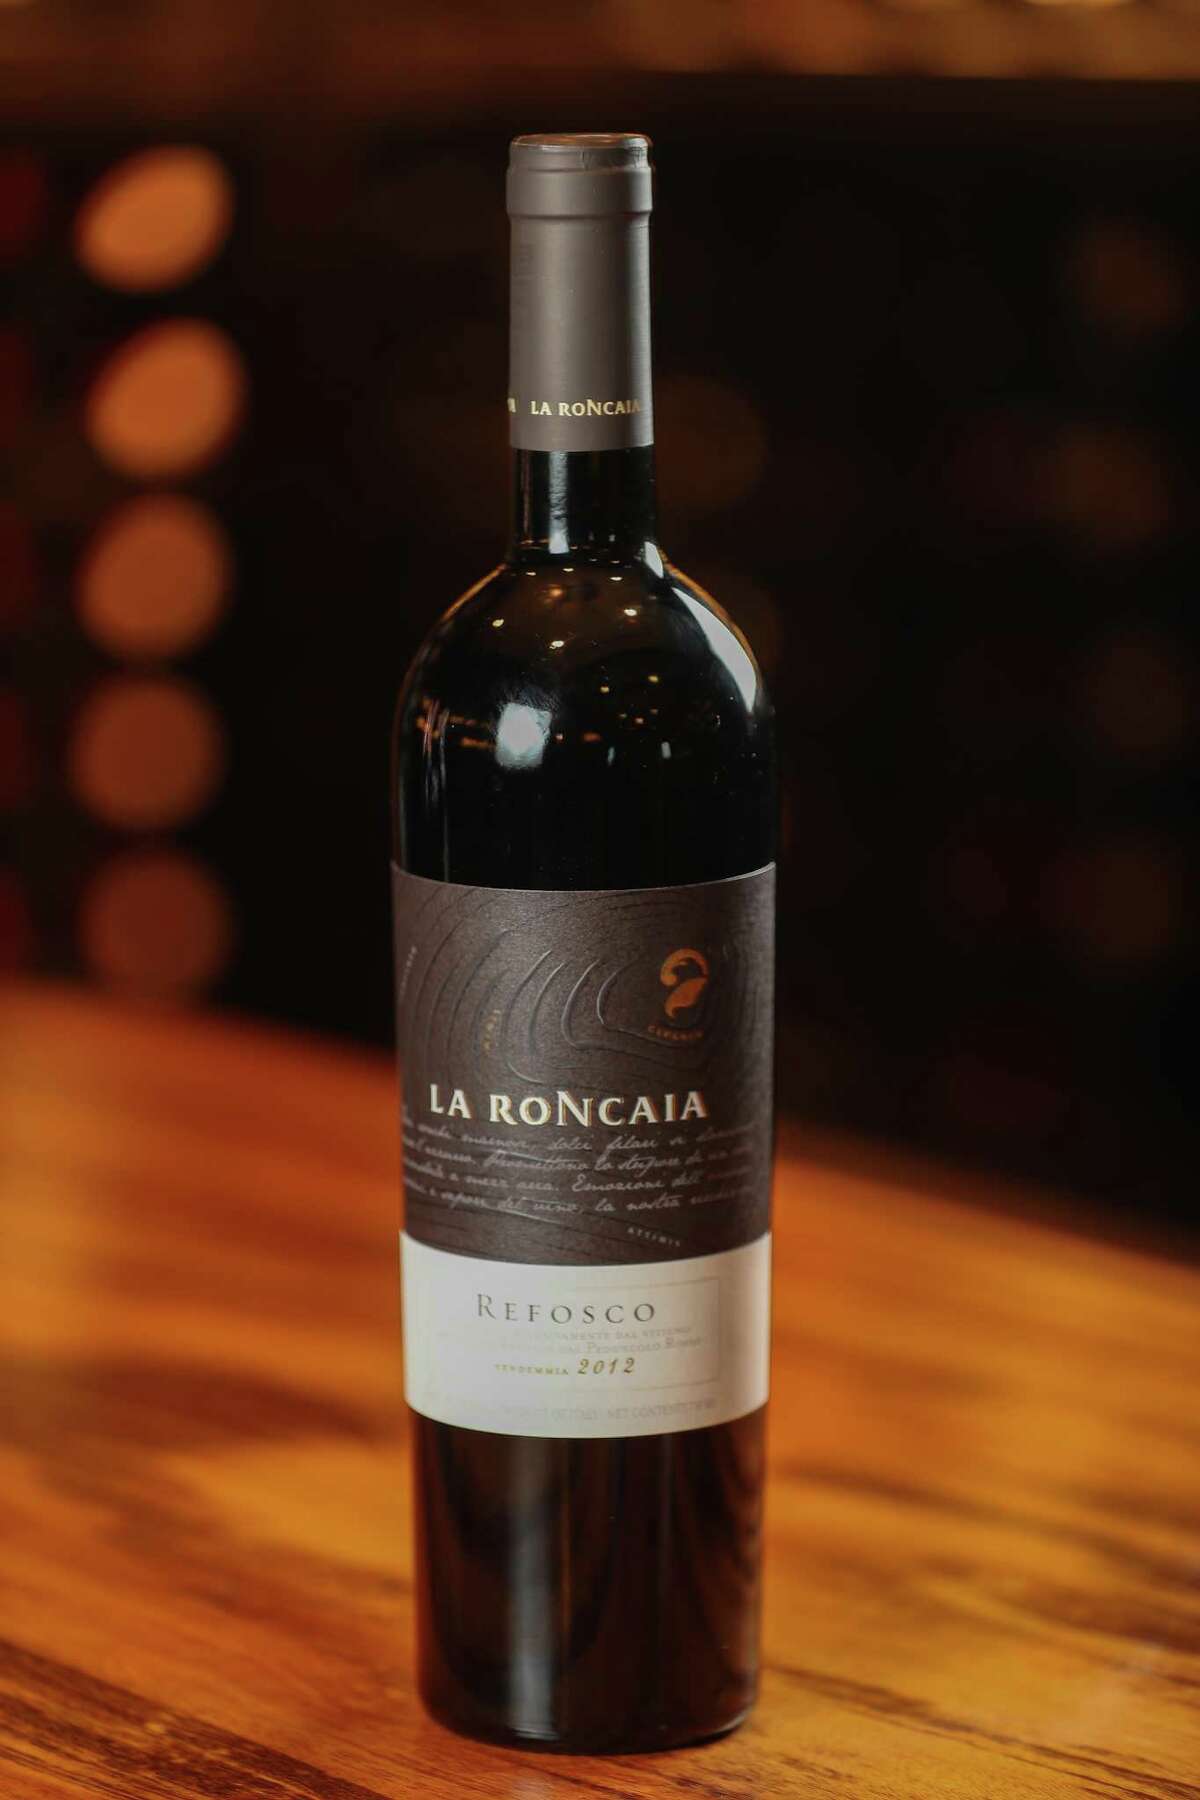 the 2012 La Roncaia Refosco from Friuli is a big, bracing red that pairs well with chef Neal Cox’s smoked Wagyu short rib at TRIBUTE restaruant at the Houstonian.